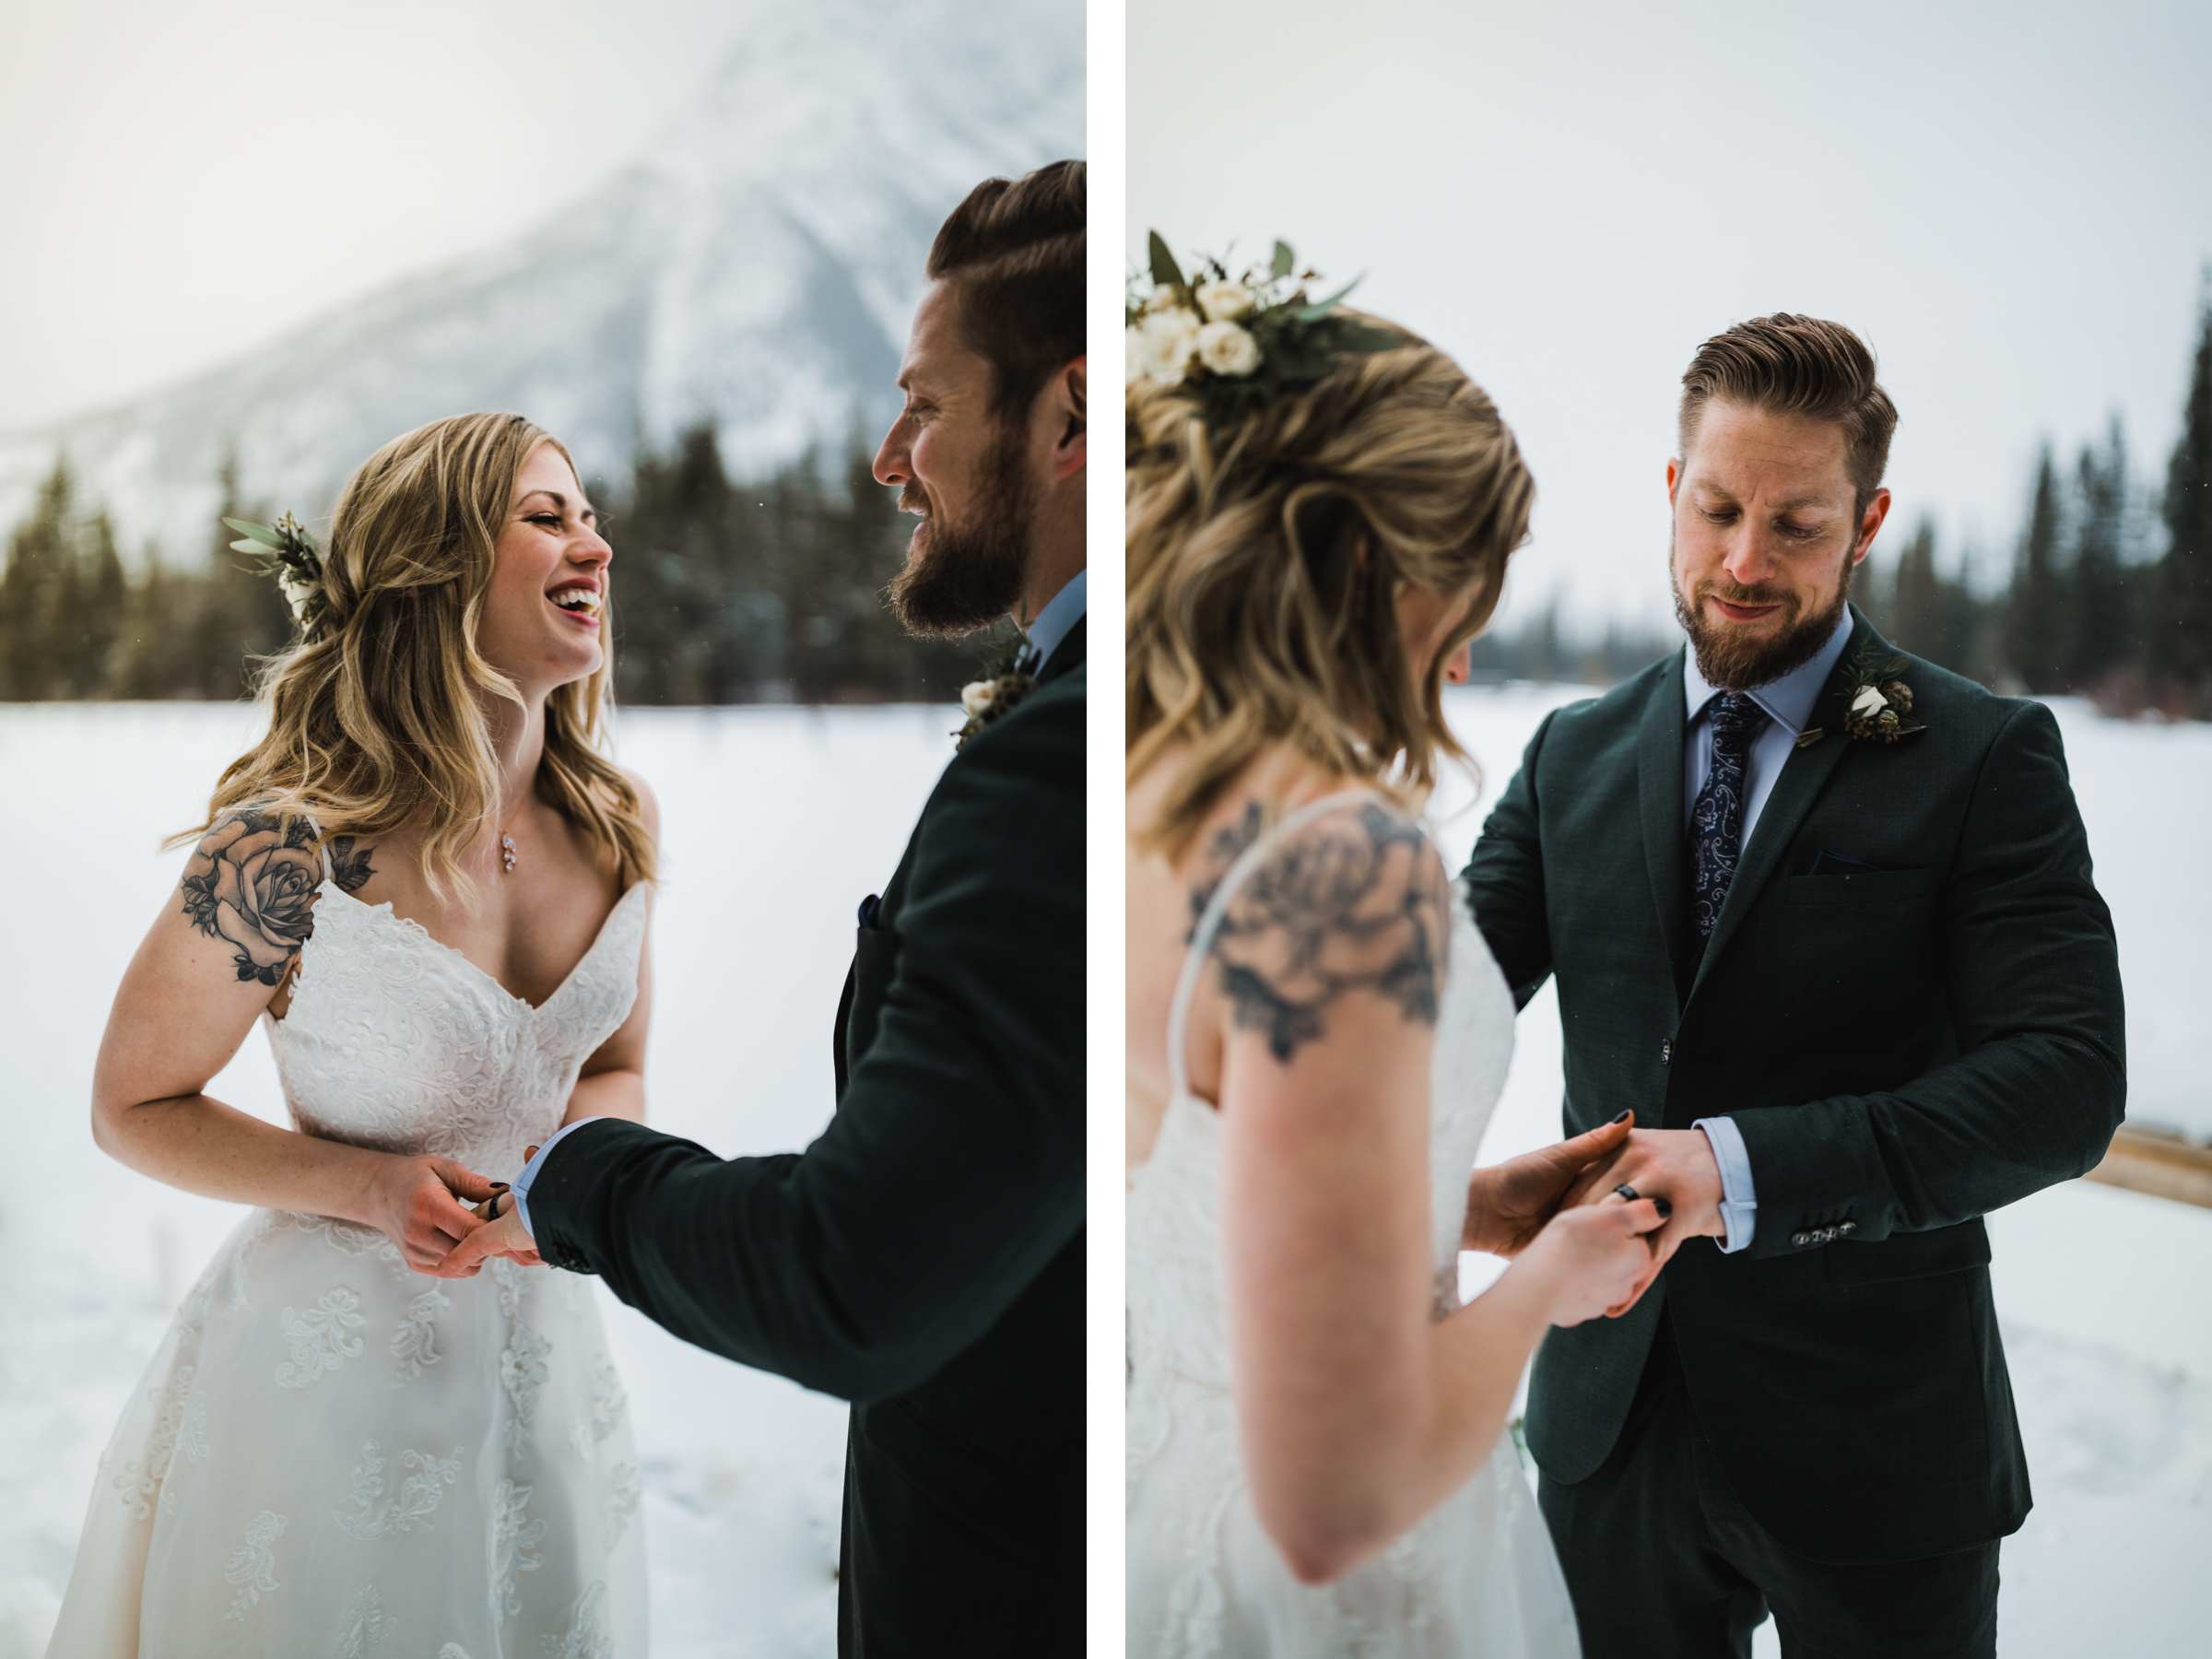 Canmore Elopement Photographer in the Canadian Rockies - Image 29